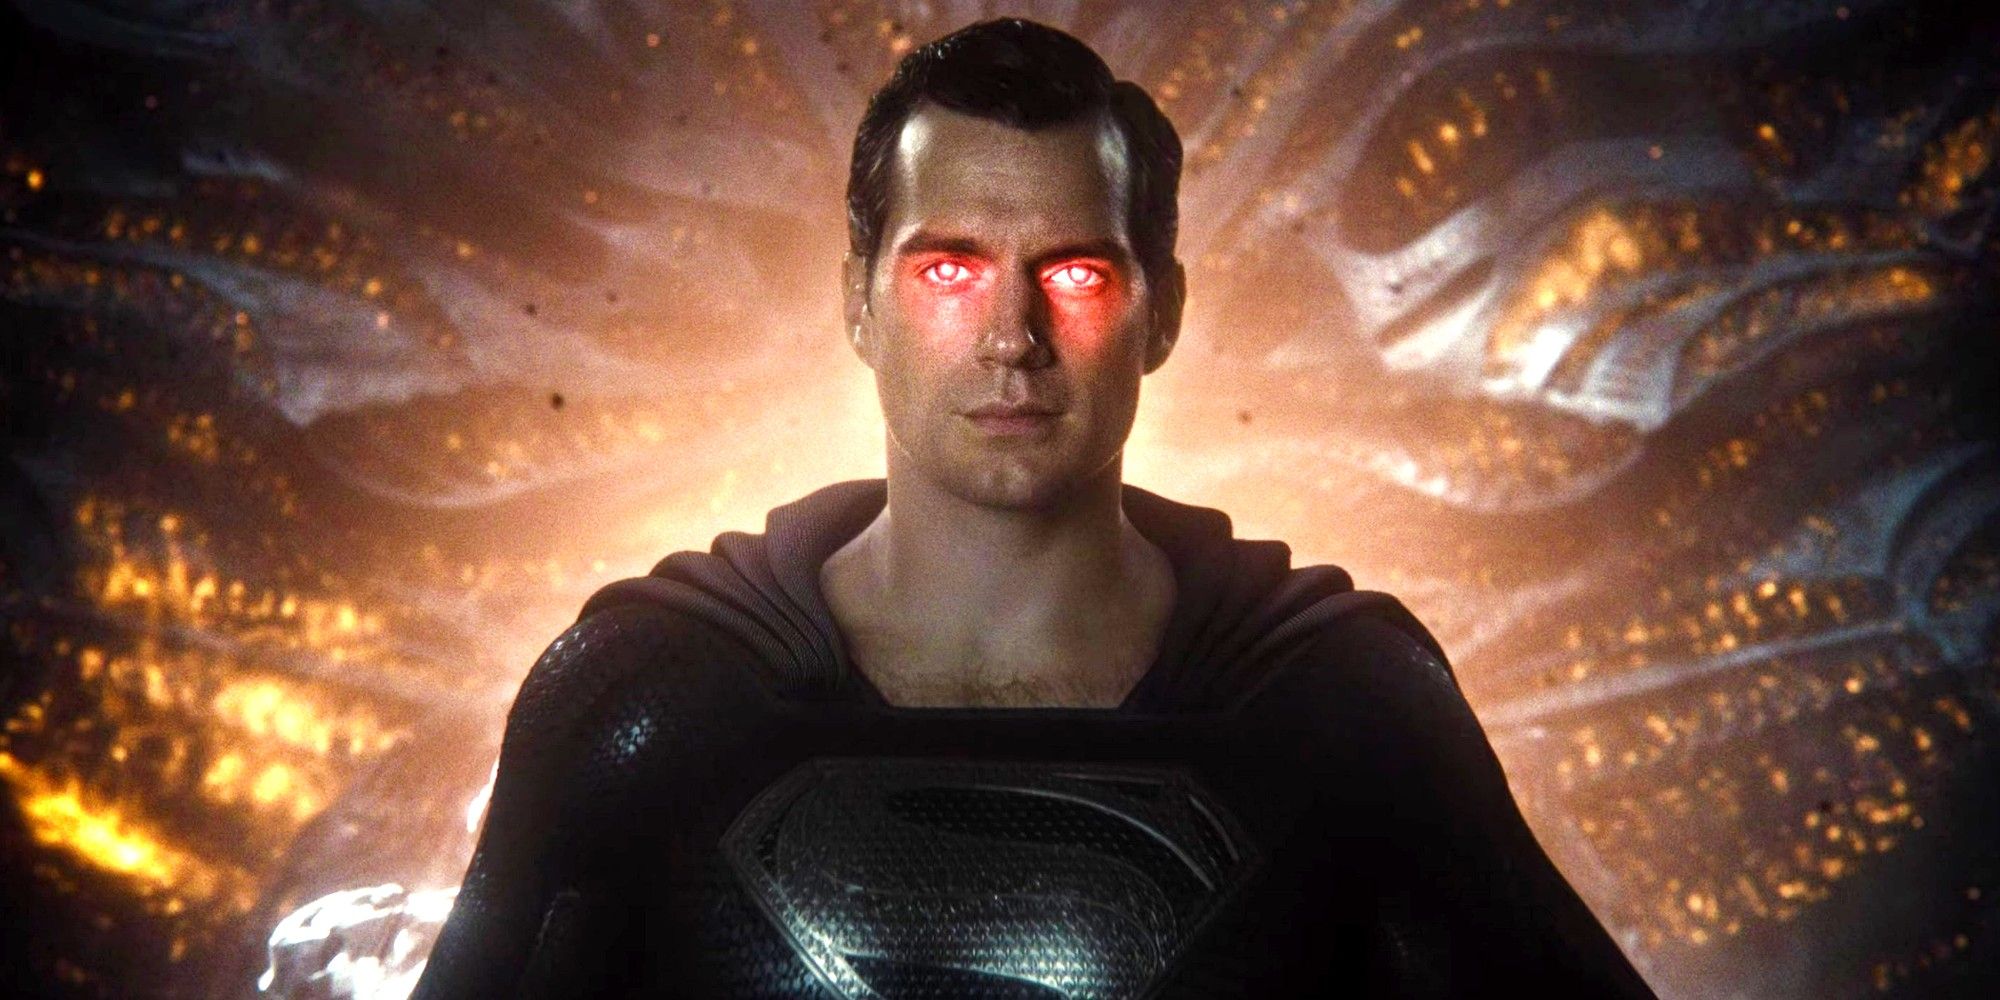 Henry Cavill as Superman in Zack Snyder's Justice League